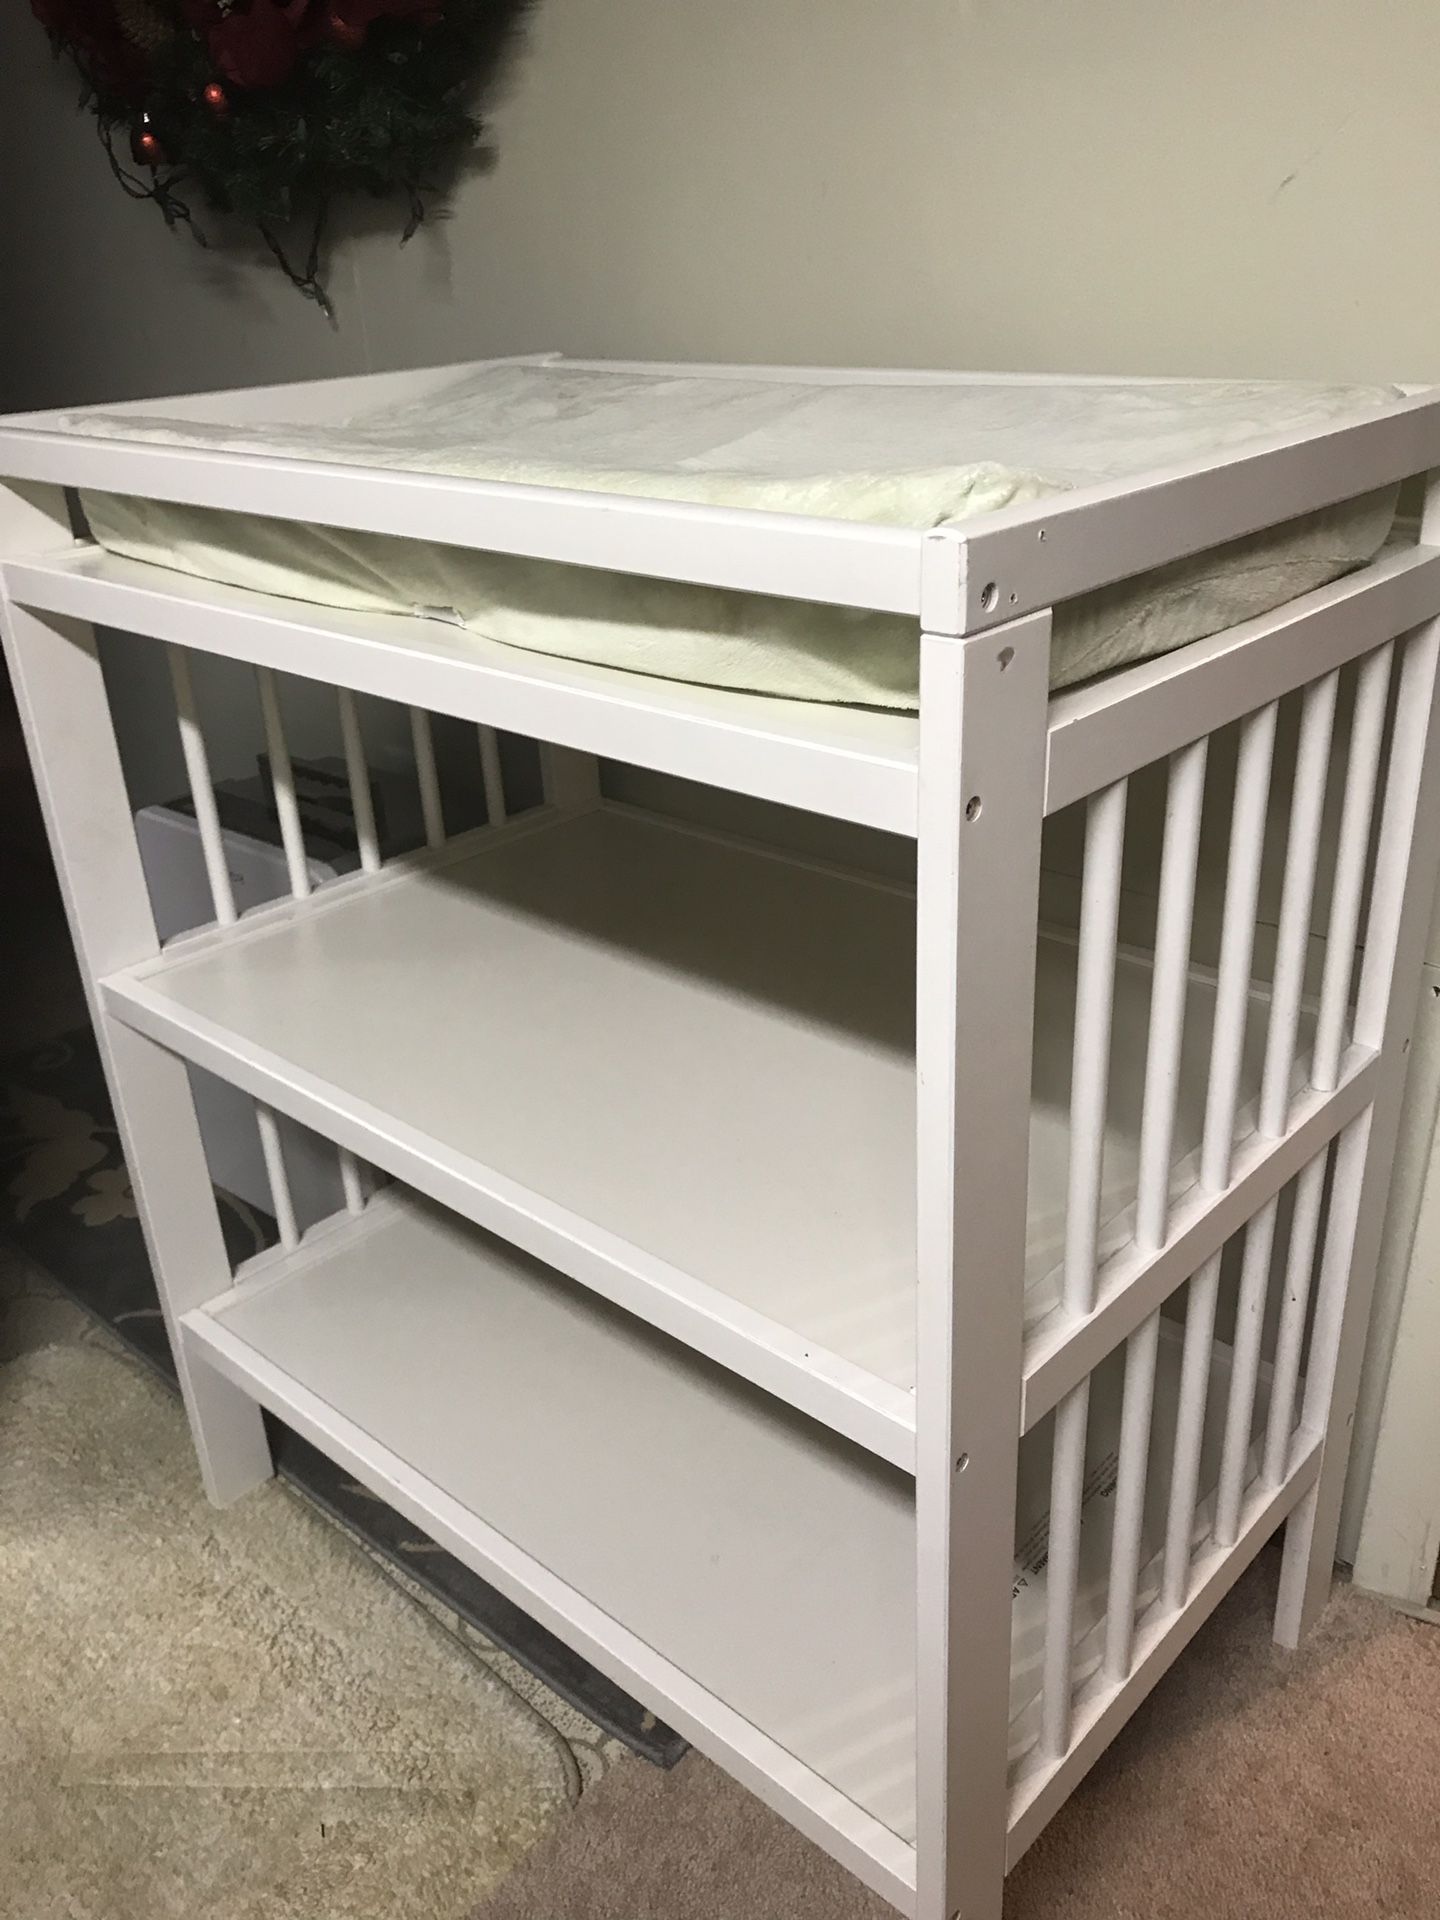 Baby changing table (IKEA)